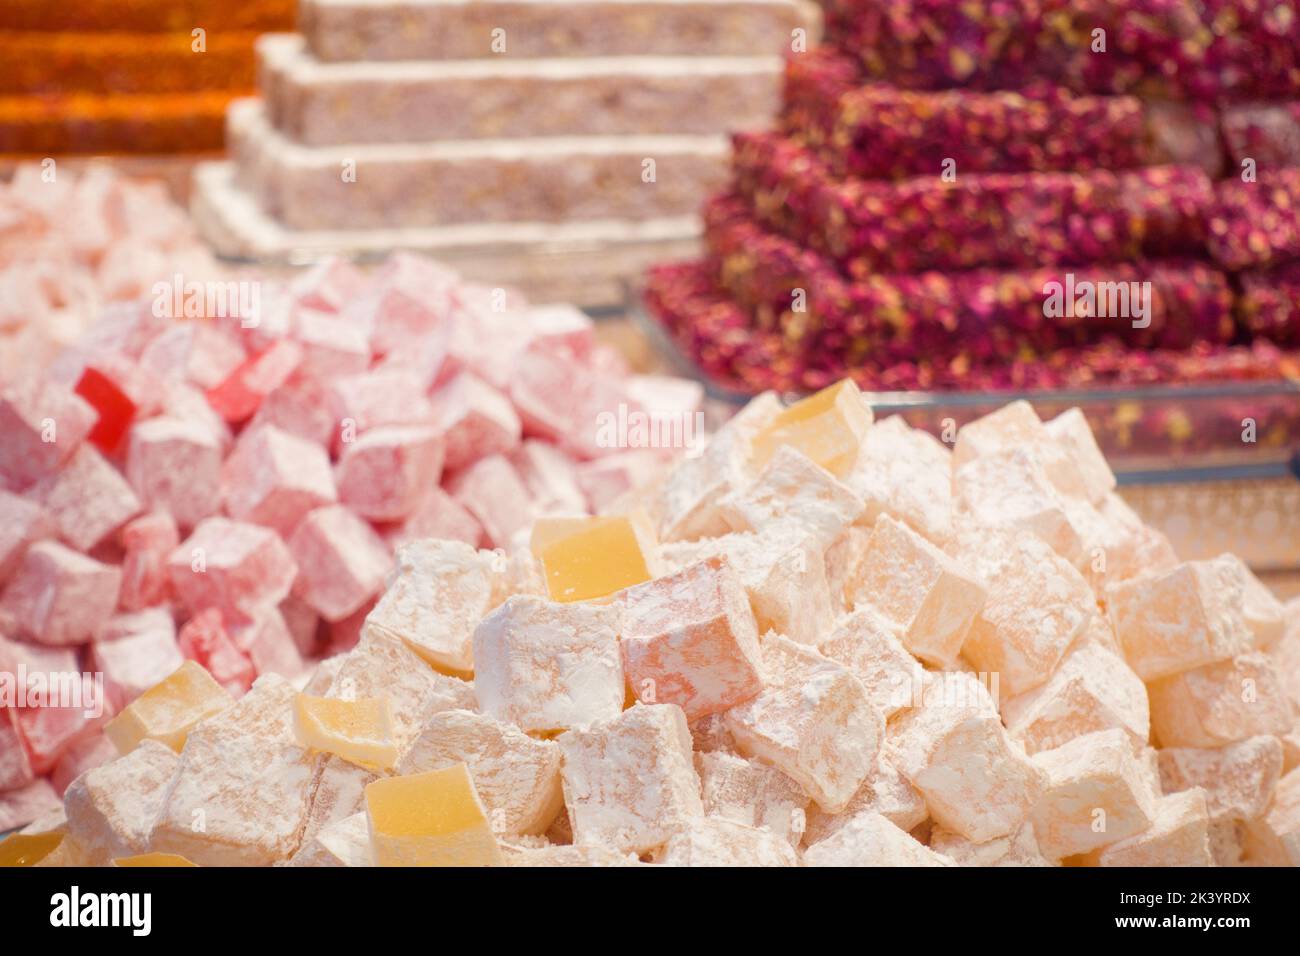 Oriental delight close up, arabic sweets.. Stock Photo